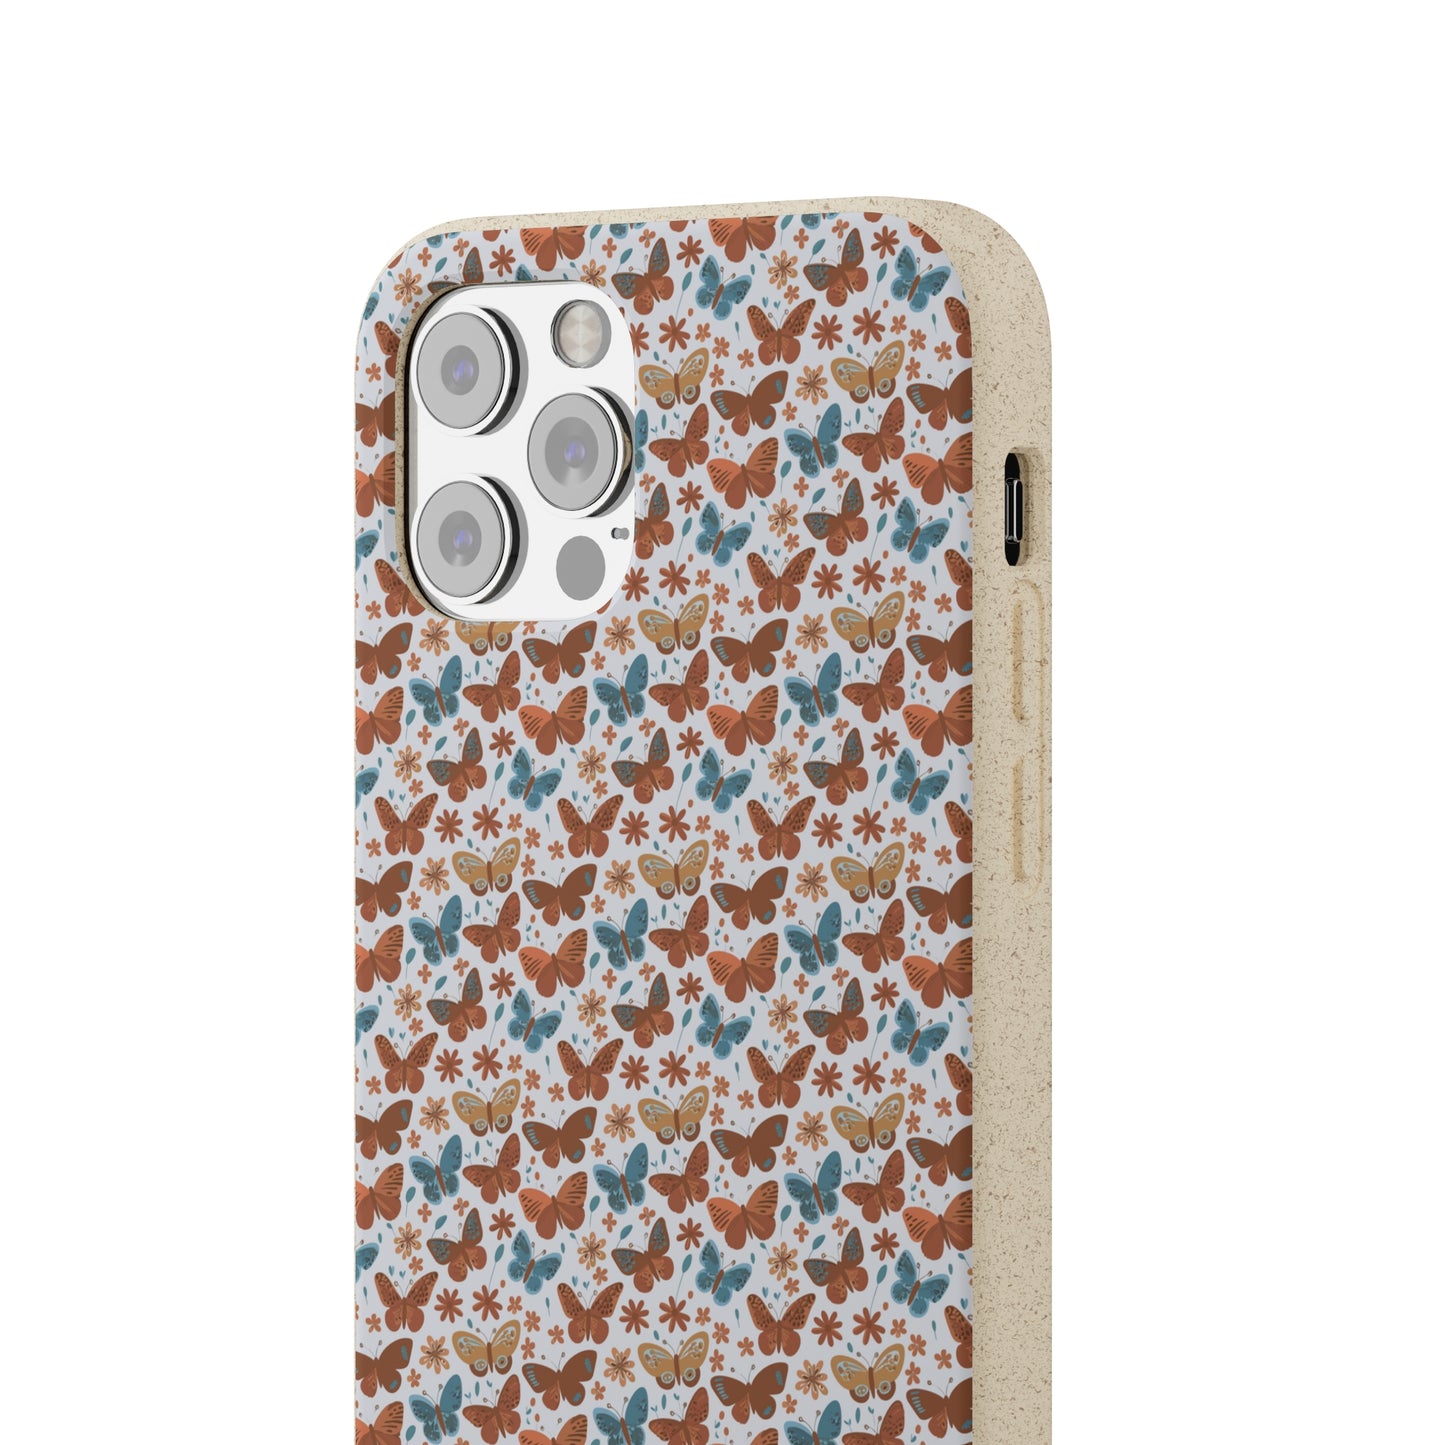 Biodegradable Phone Cases with Teal and Brown Butterflies: A Beautiful and Eco-Friendly Way to Protect Your Phone and the Planet